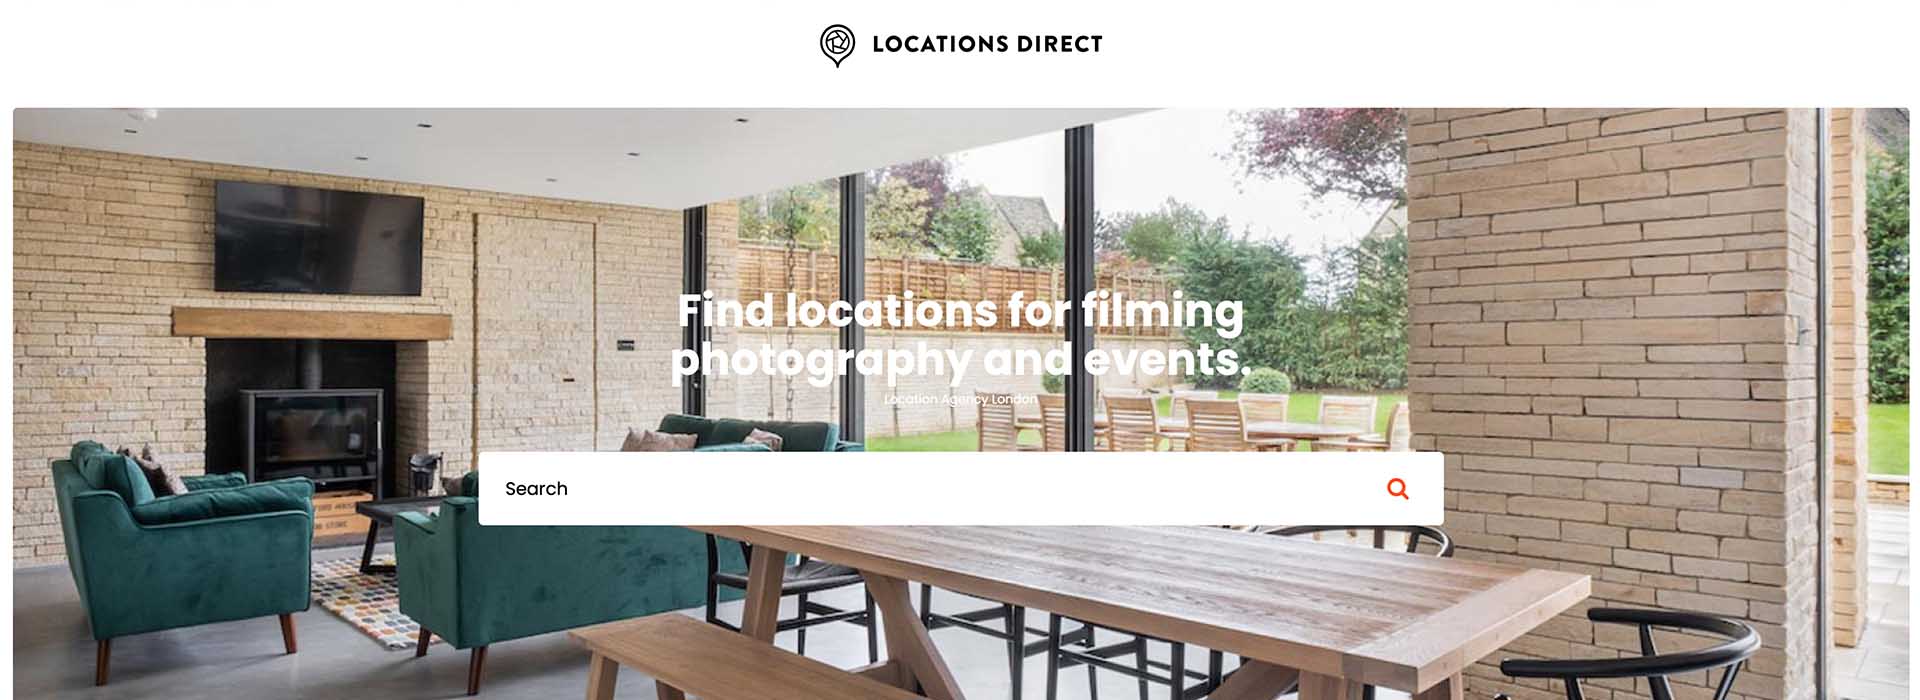 Locations Direct, Location Agency in London